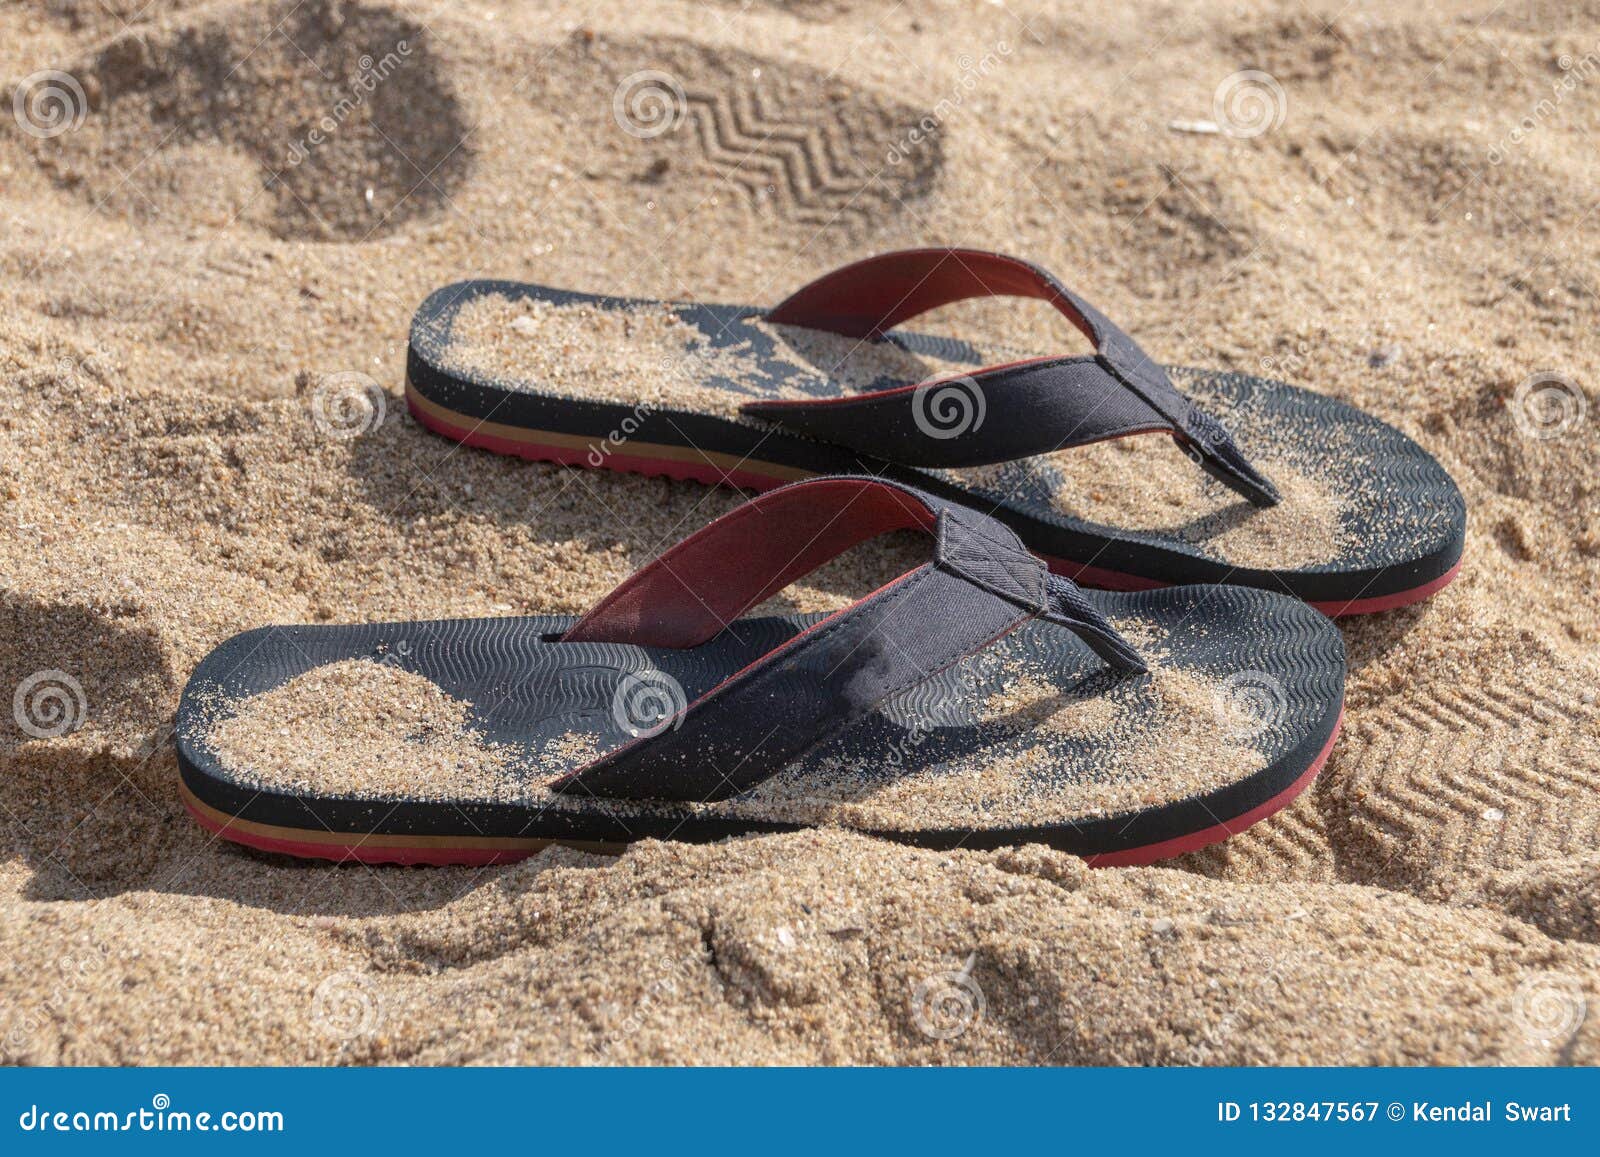 slops in the sand